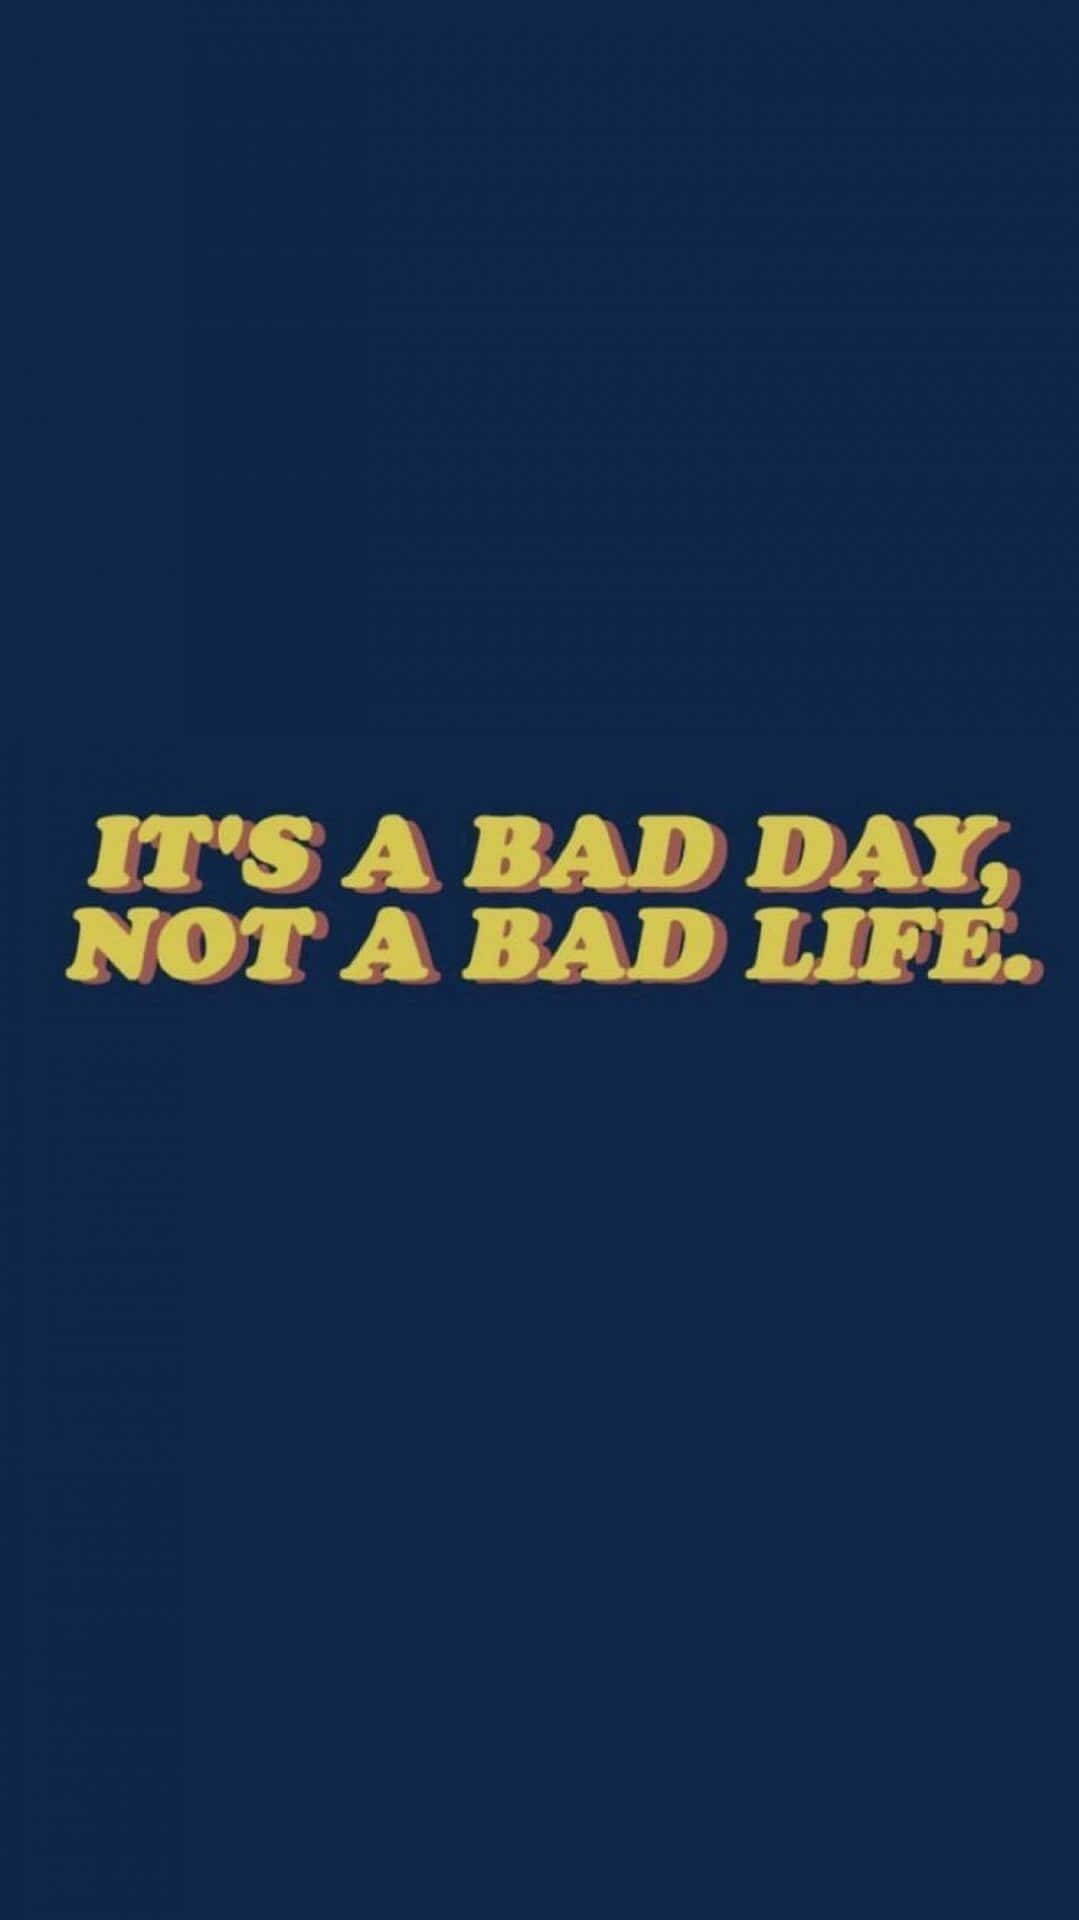 It's A Bad Day, Not A Bad Life T-shirt Wallpaper